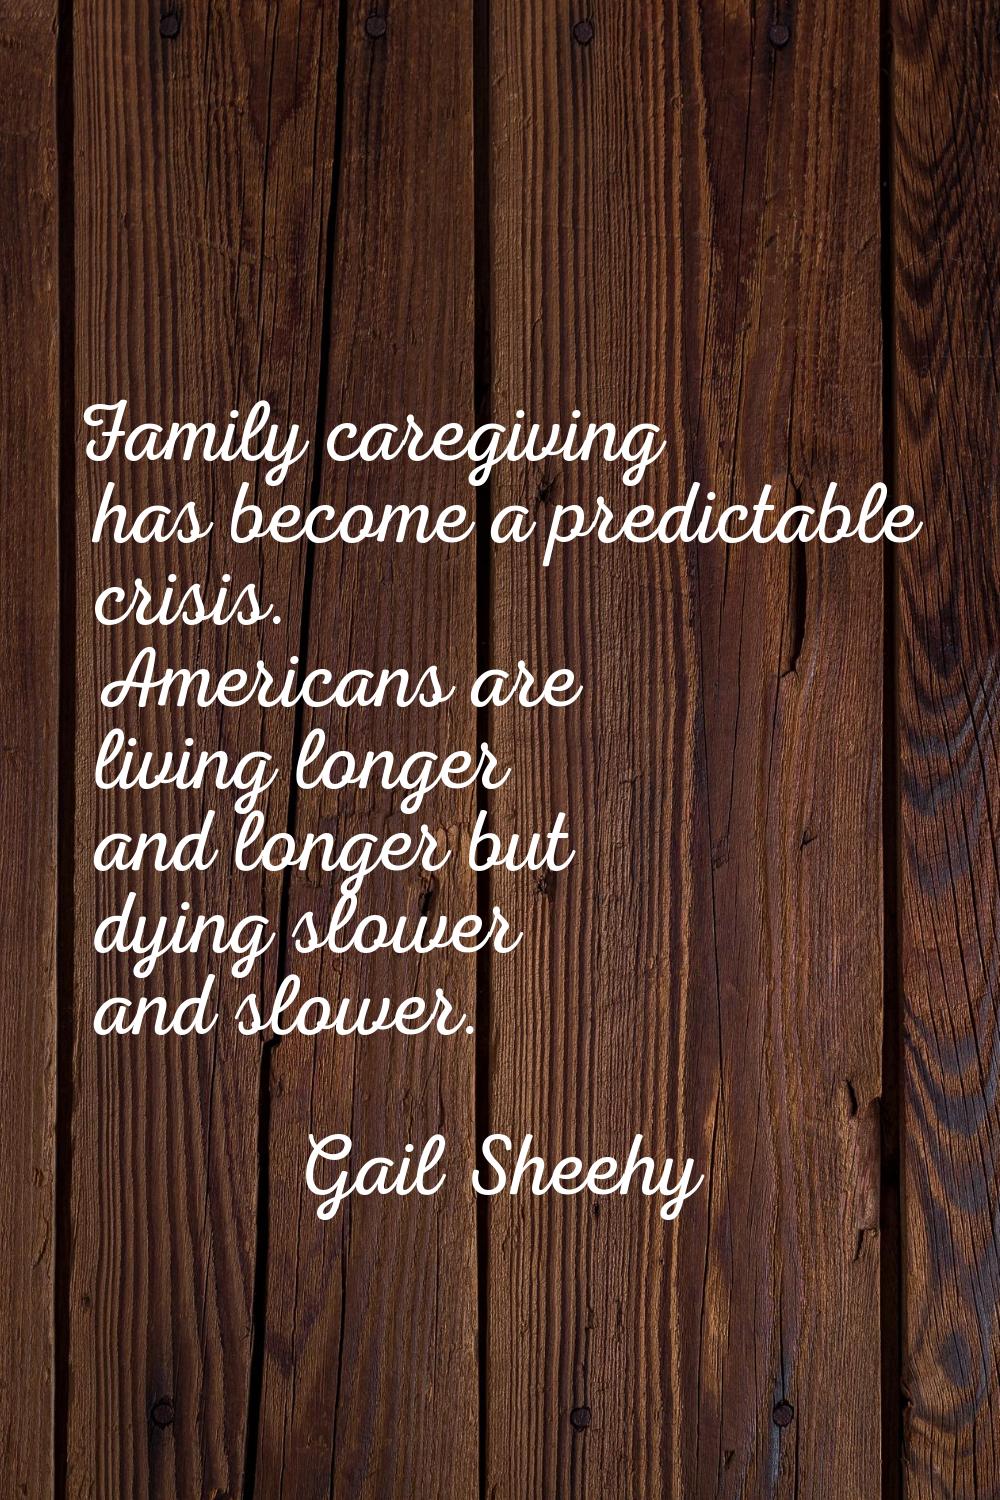 Family caregiving has become a predictable crisis. Americans are living longer and longer but dying